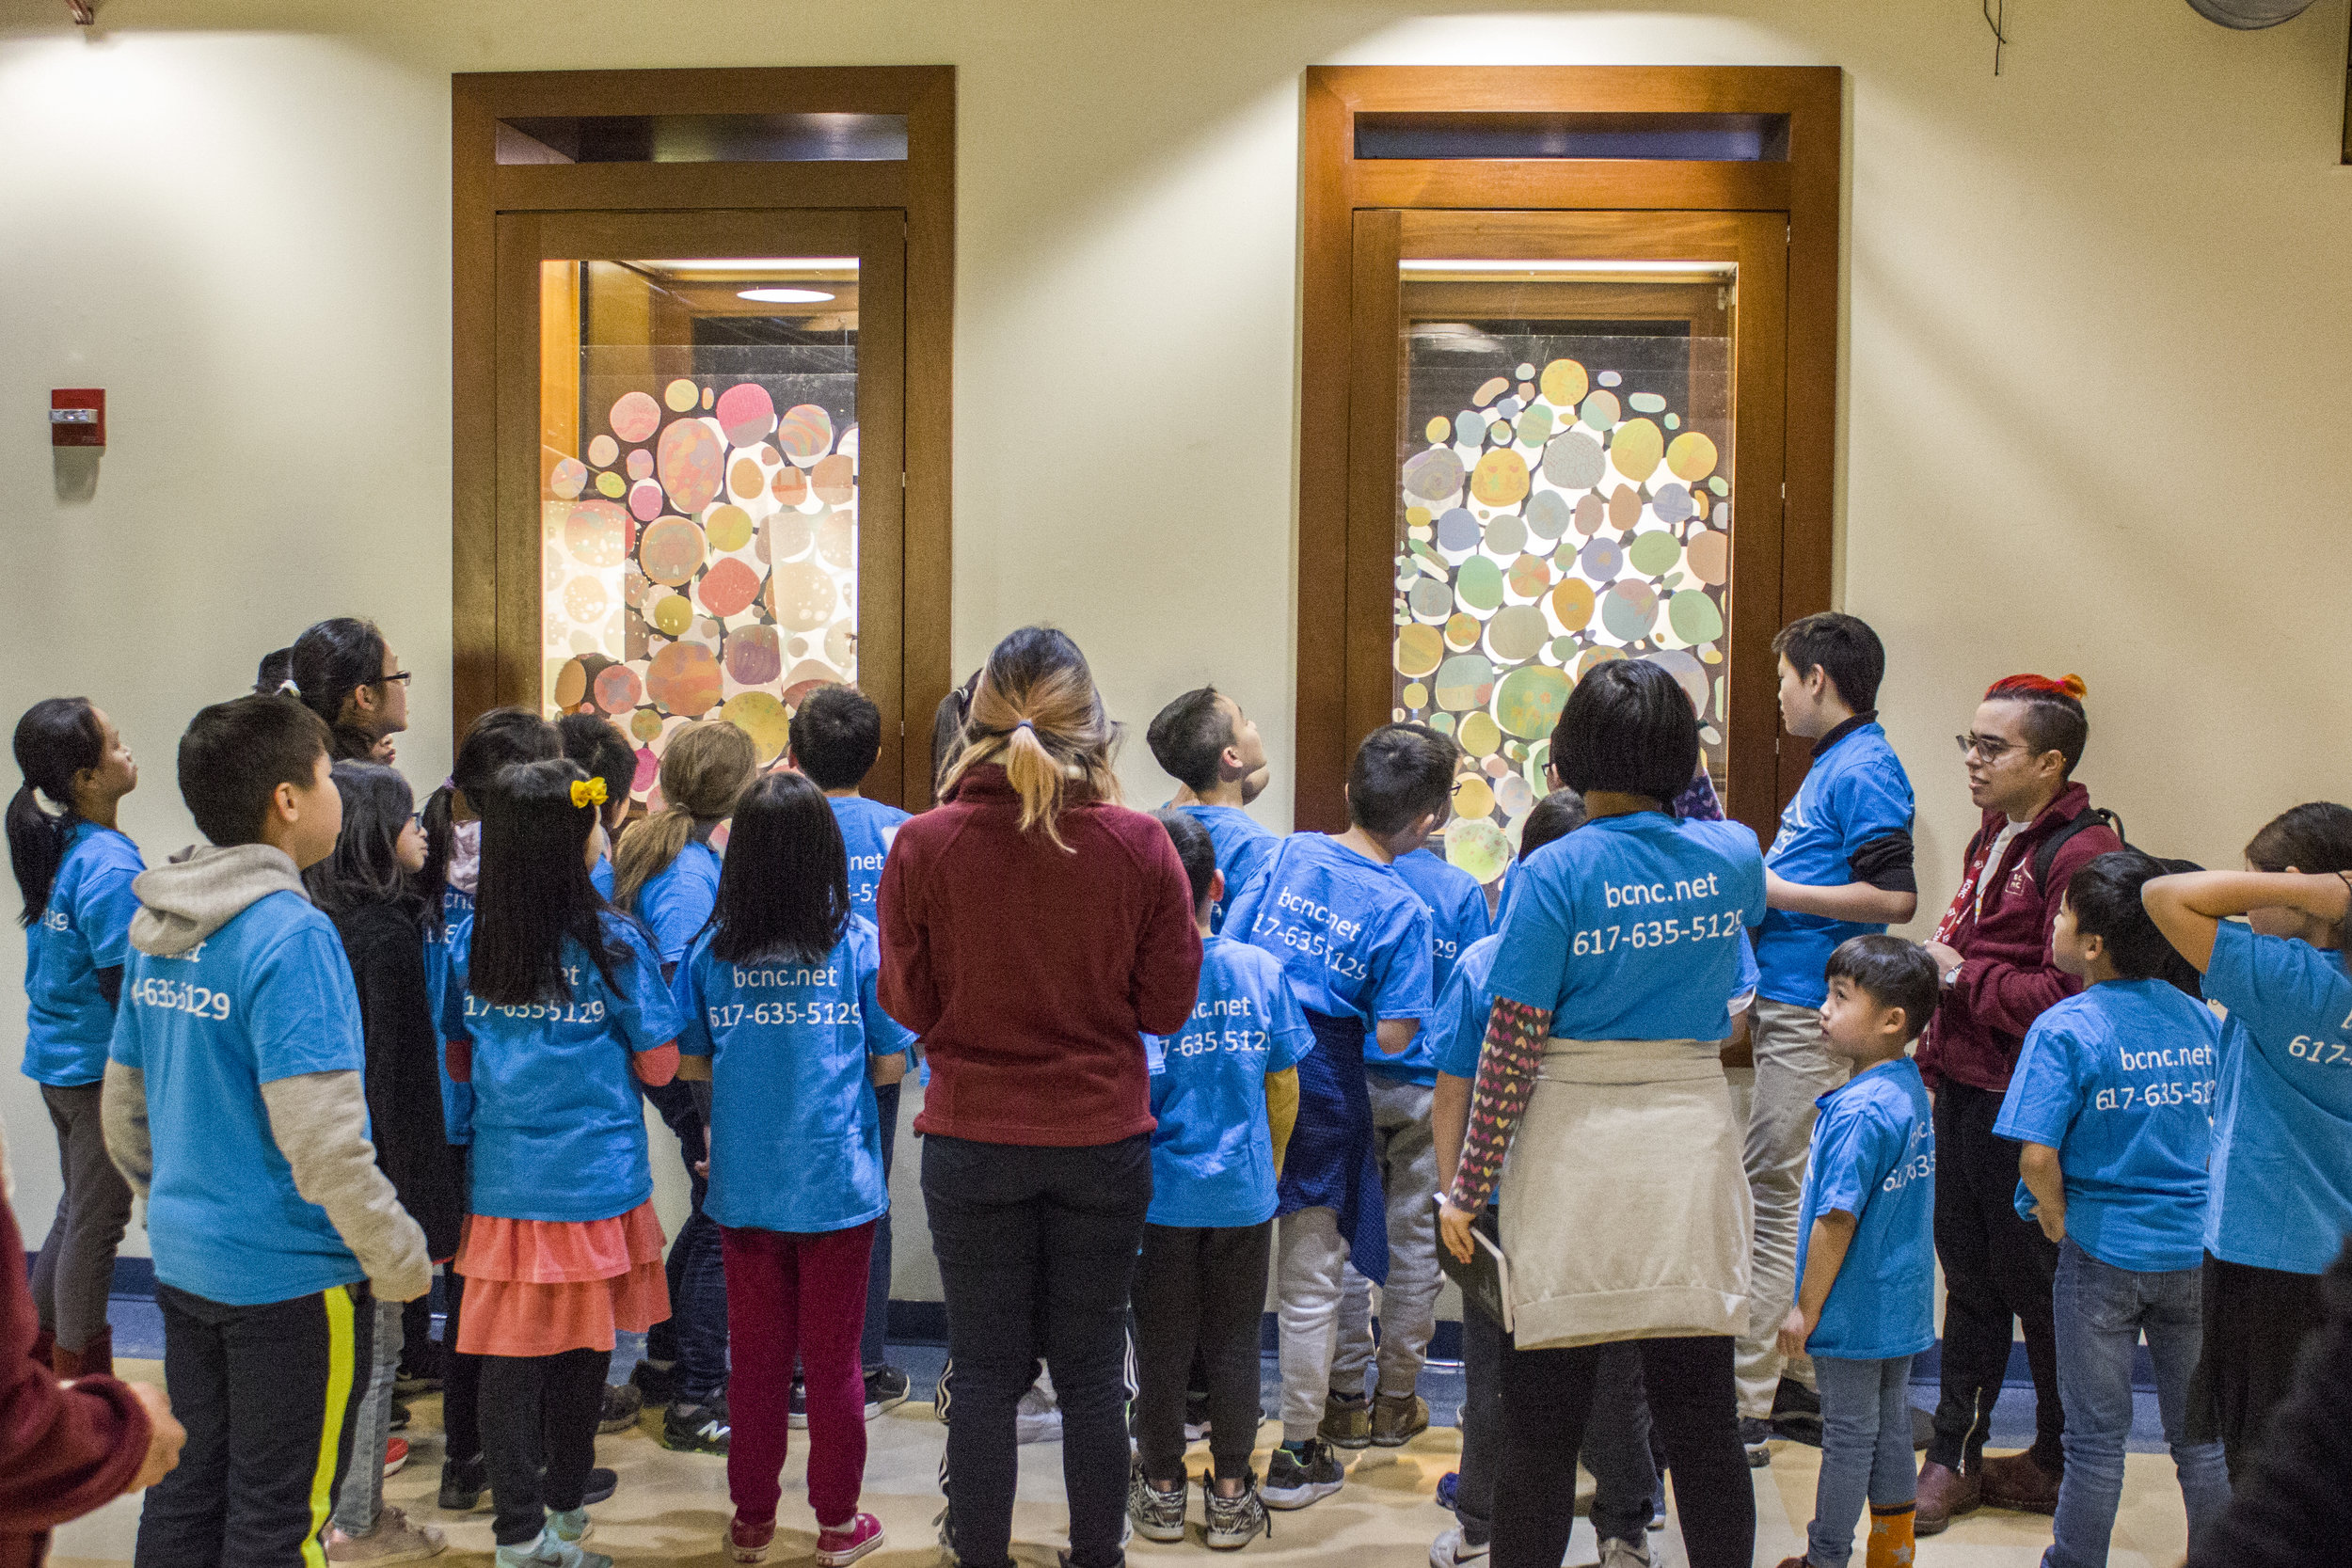  Children from Boston Chinatown Neighborhood Center participate in the ribbon cutting ceremony for their community art piece at the  Boston Children’s Museum . Special thanks to Rachel Farkas from BCM for bringing this project to life!  Photocredit: 